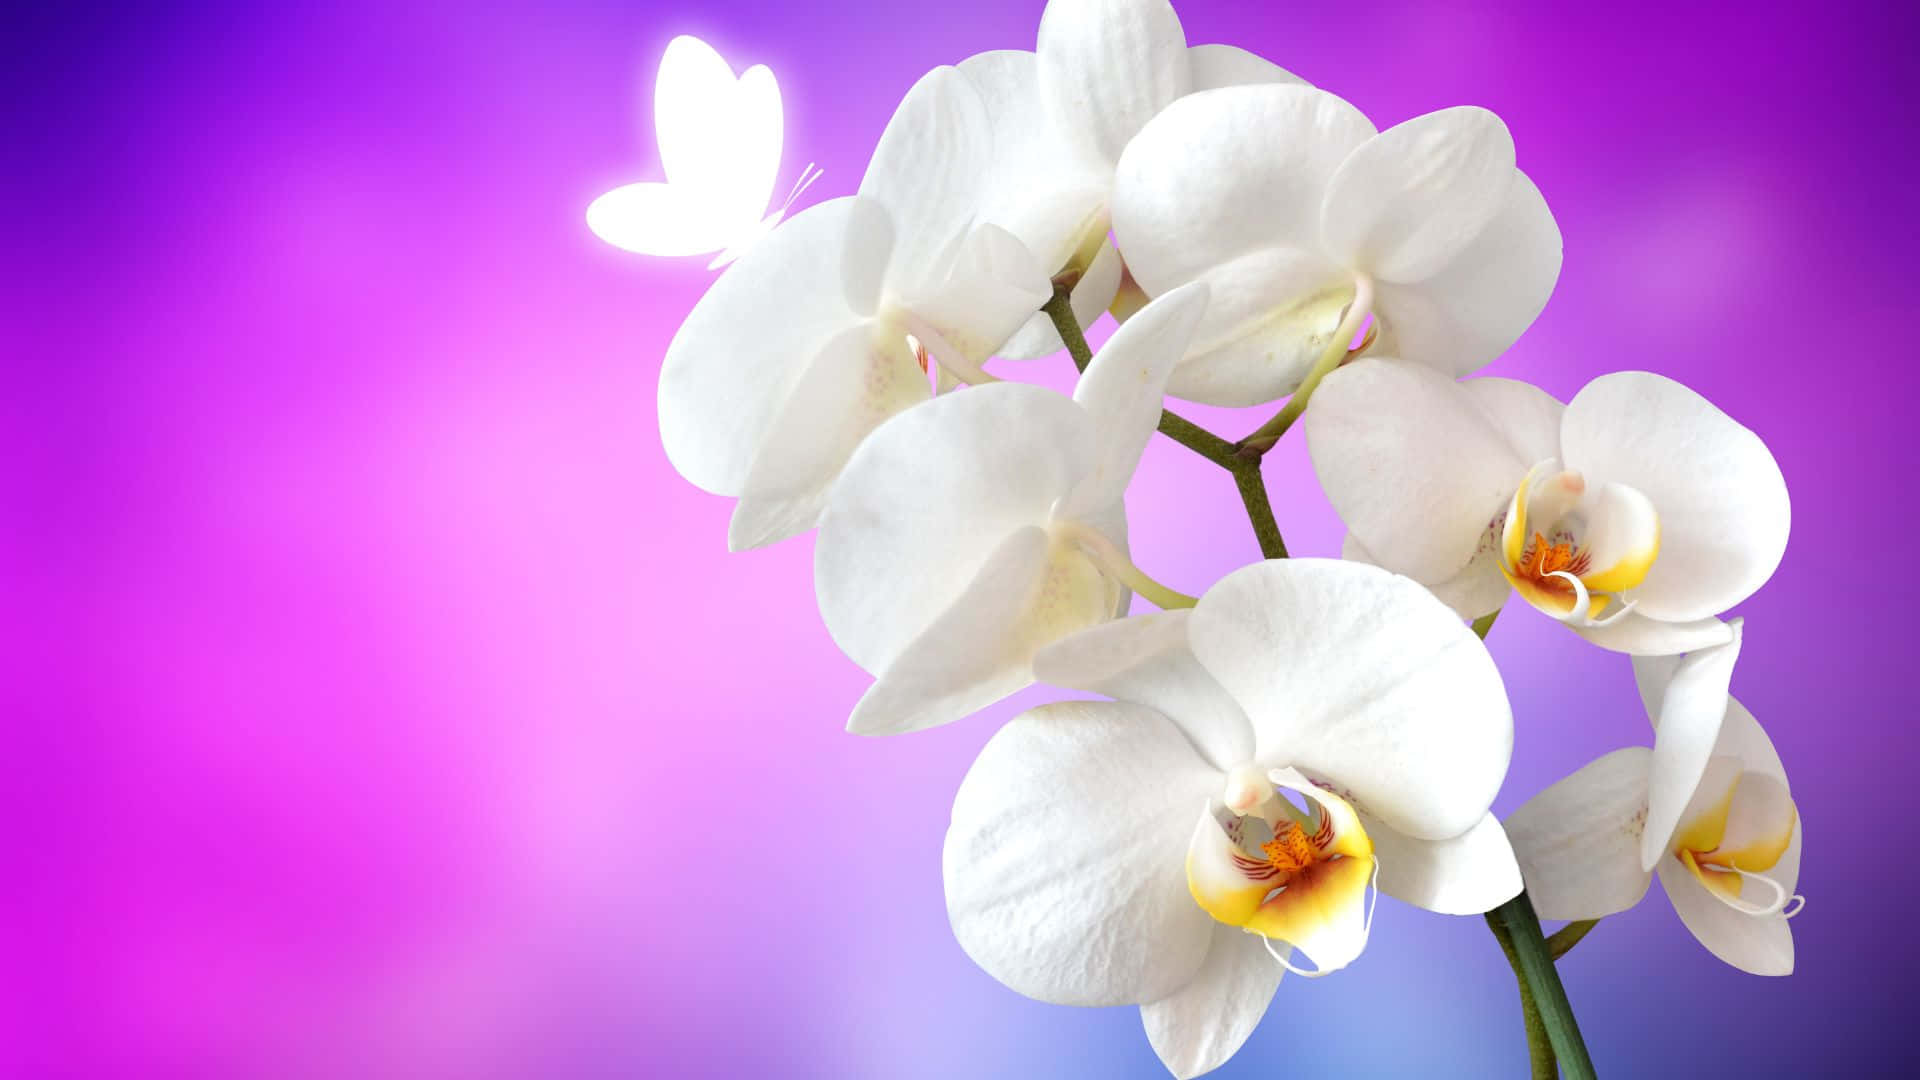 "A breathtakingly beautiful bouquet of multicolored orchids."